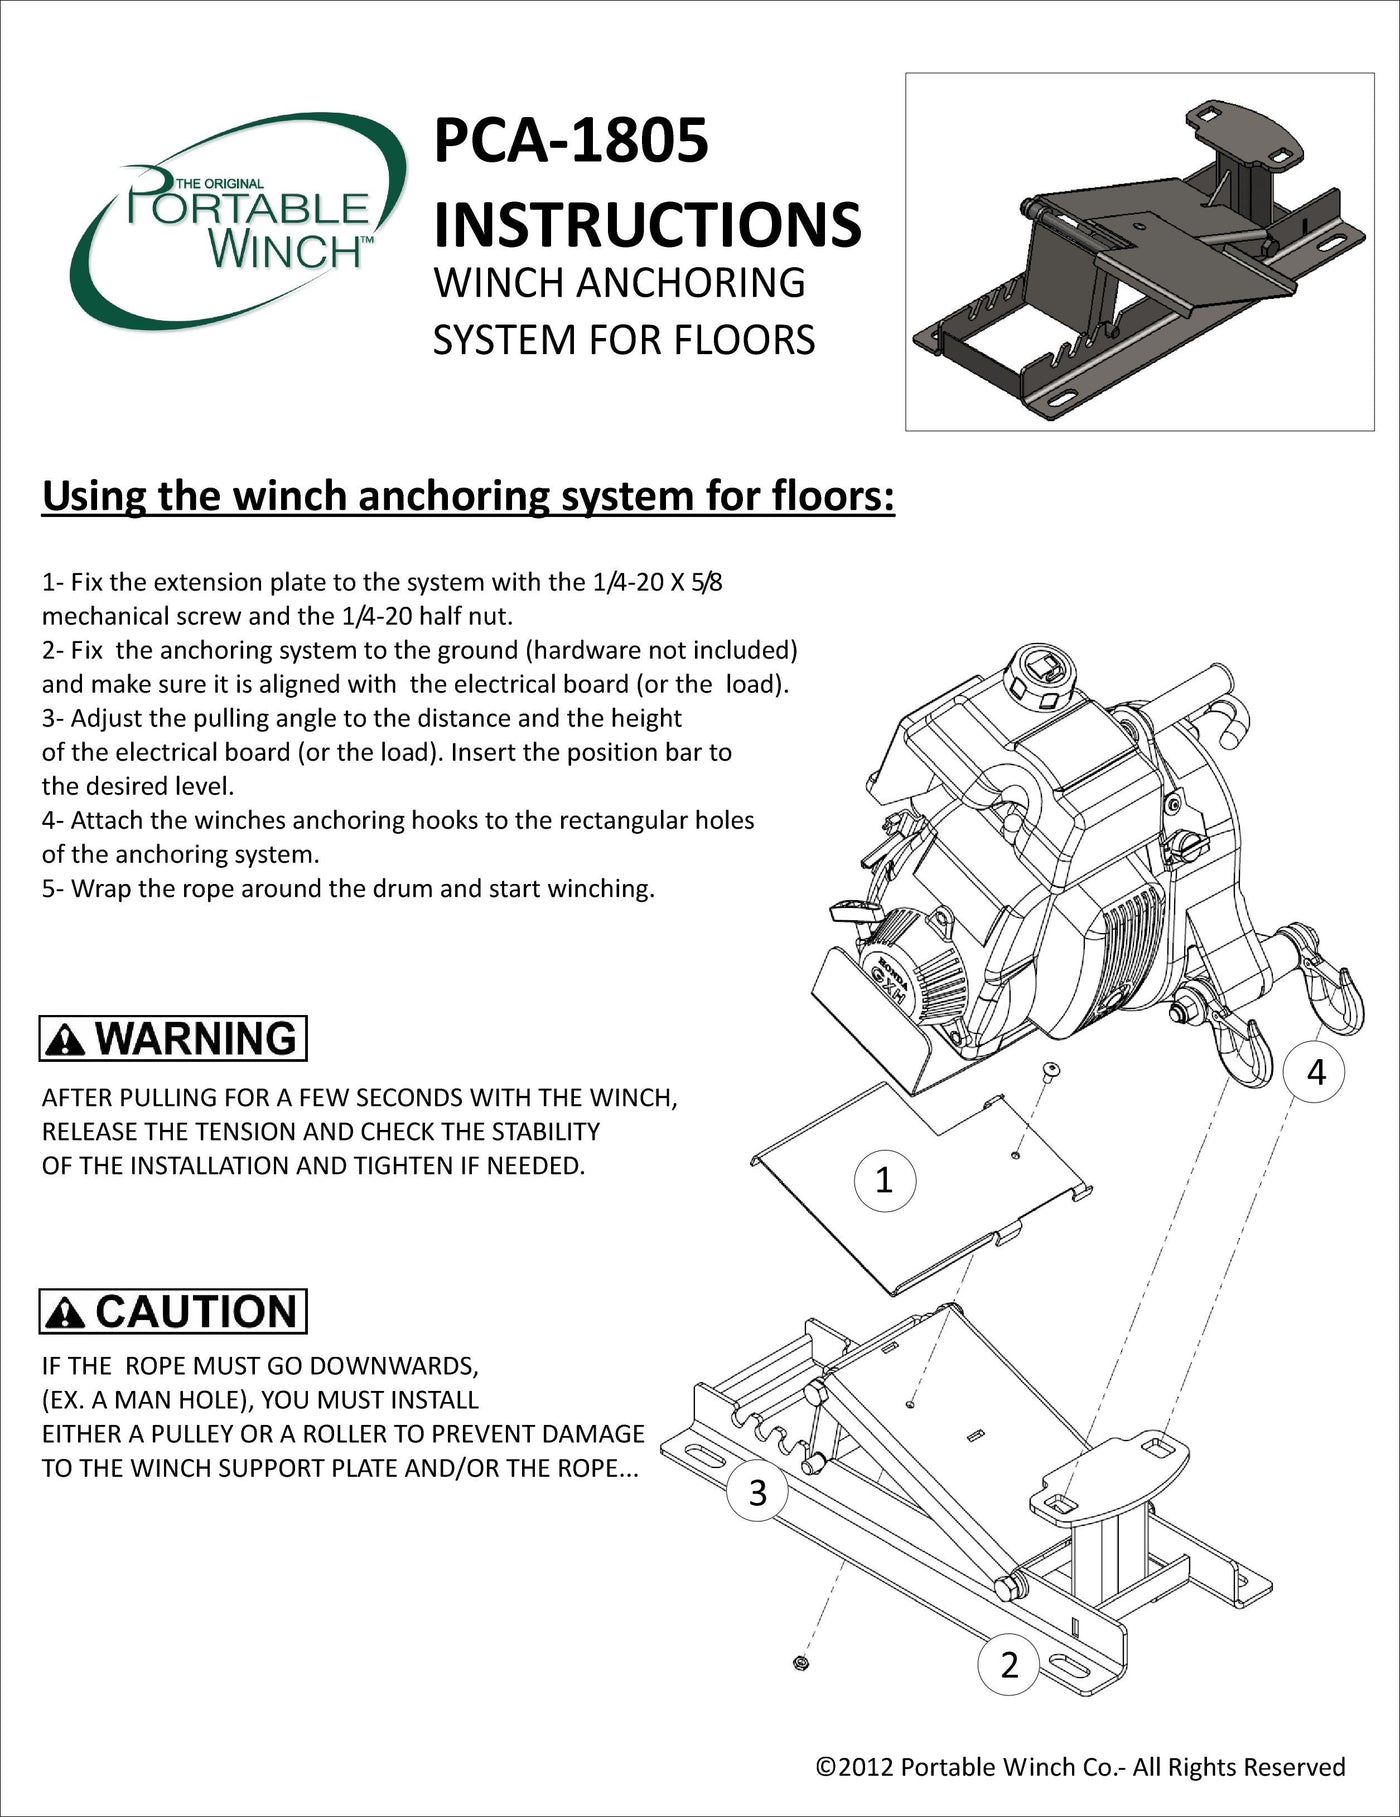 FLOOR-MOUNT WINCH ANCHORING SYSTEM